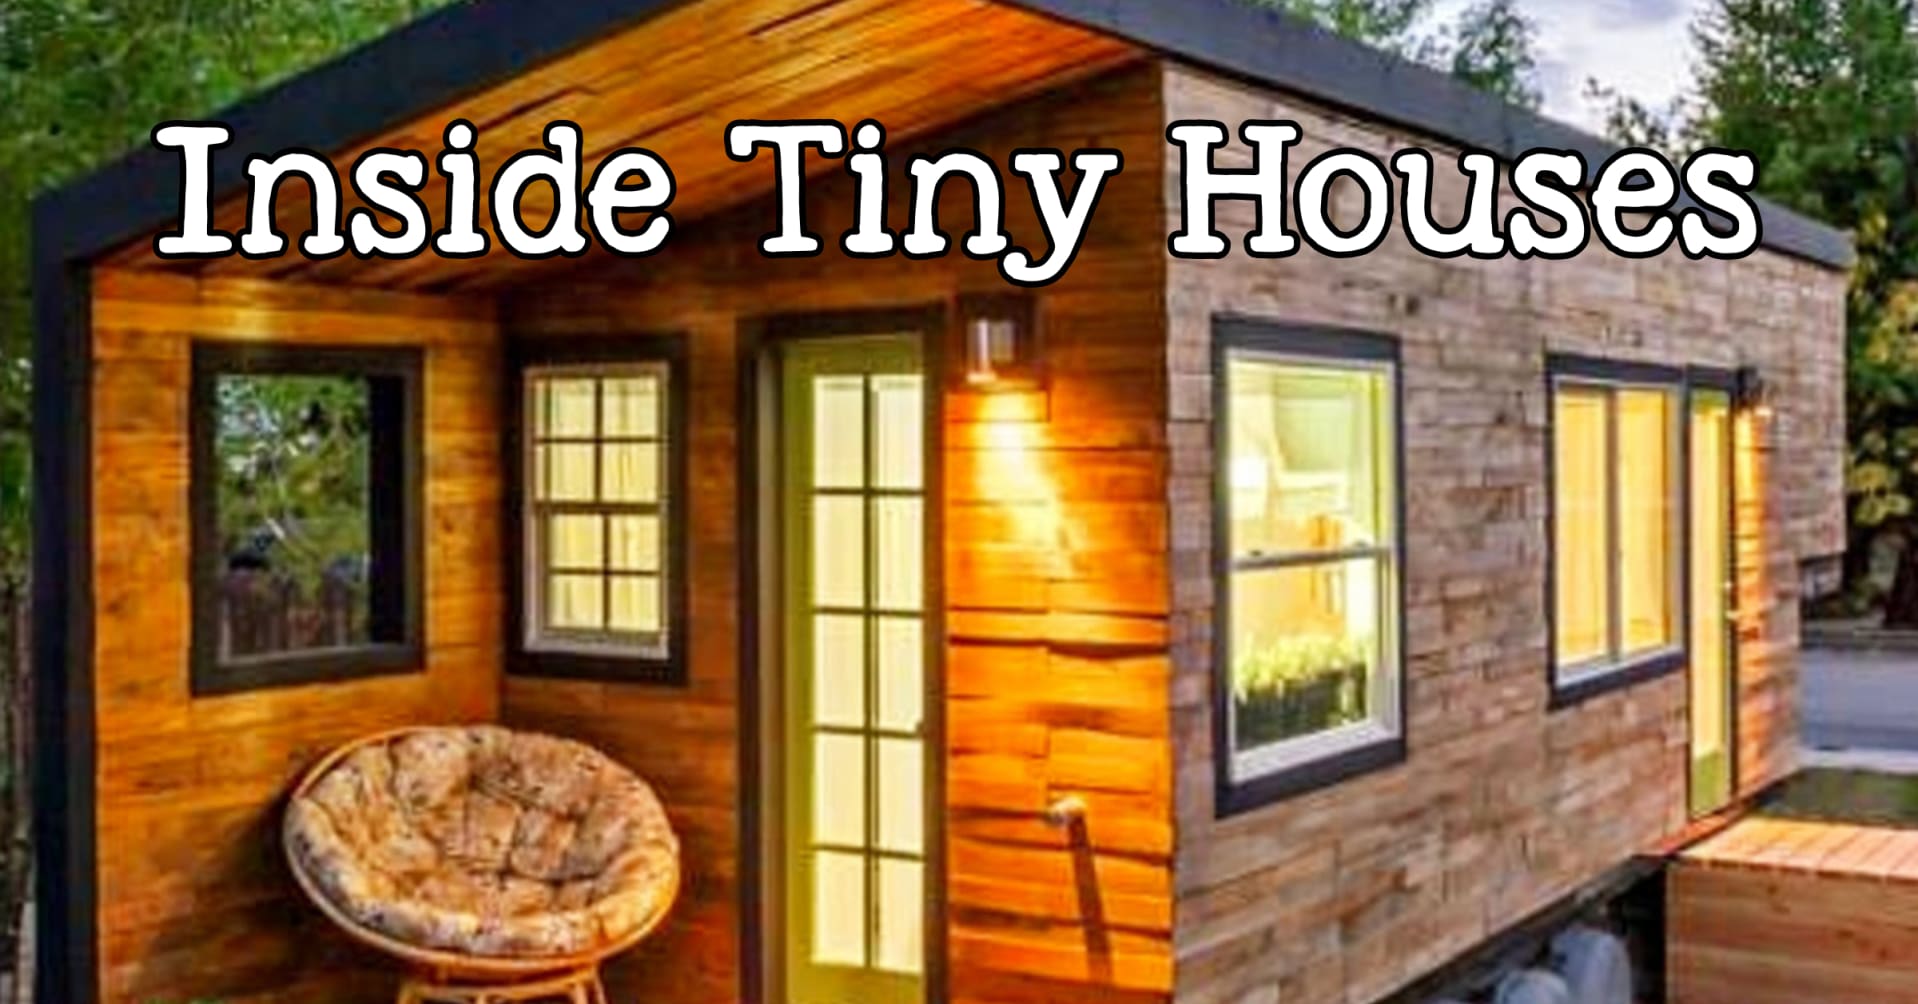 Tiny houses! Love HGTV Tiny Homes? Take a look inside tiny houses wth these tiny house interior photos and images (interior AND exterior) These tiny house designs and floor plans are perfect tiny house plans under 1000 sq ft - they're like a tiny apartment on wheels for tiny home communities!